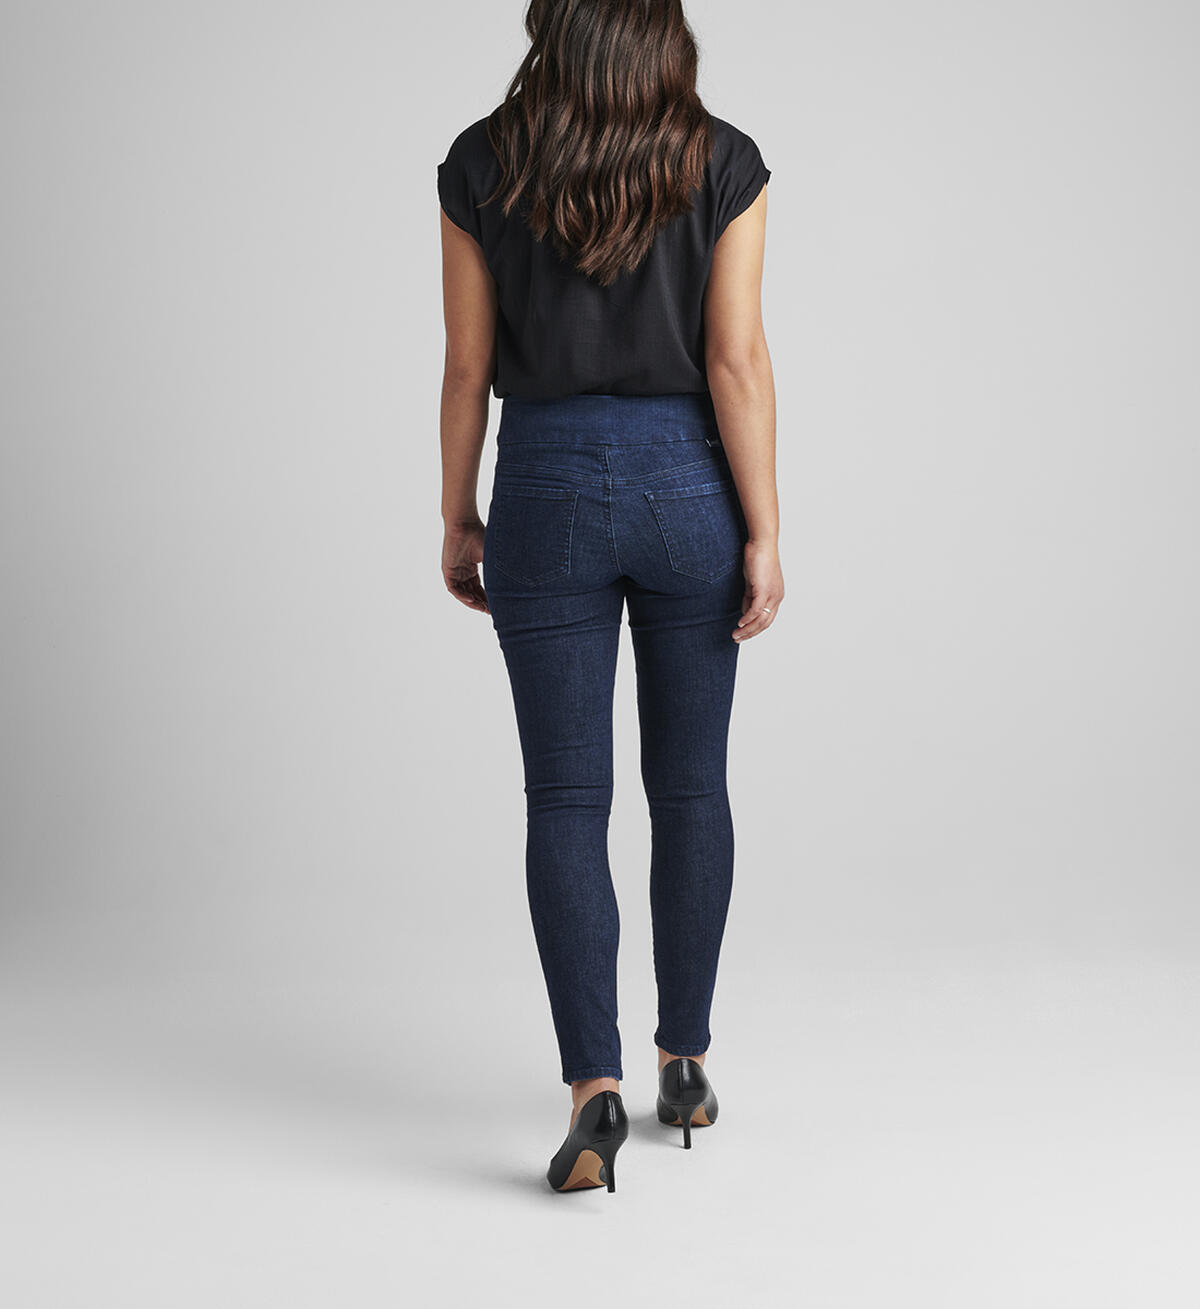 Nora Mid Rise Skinny Pull-On Jeans, , hi-res image number 1